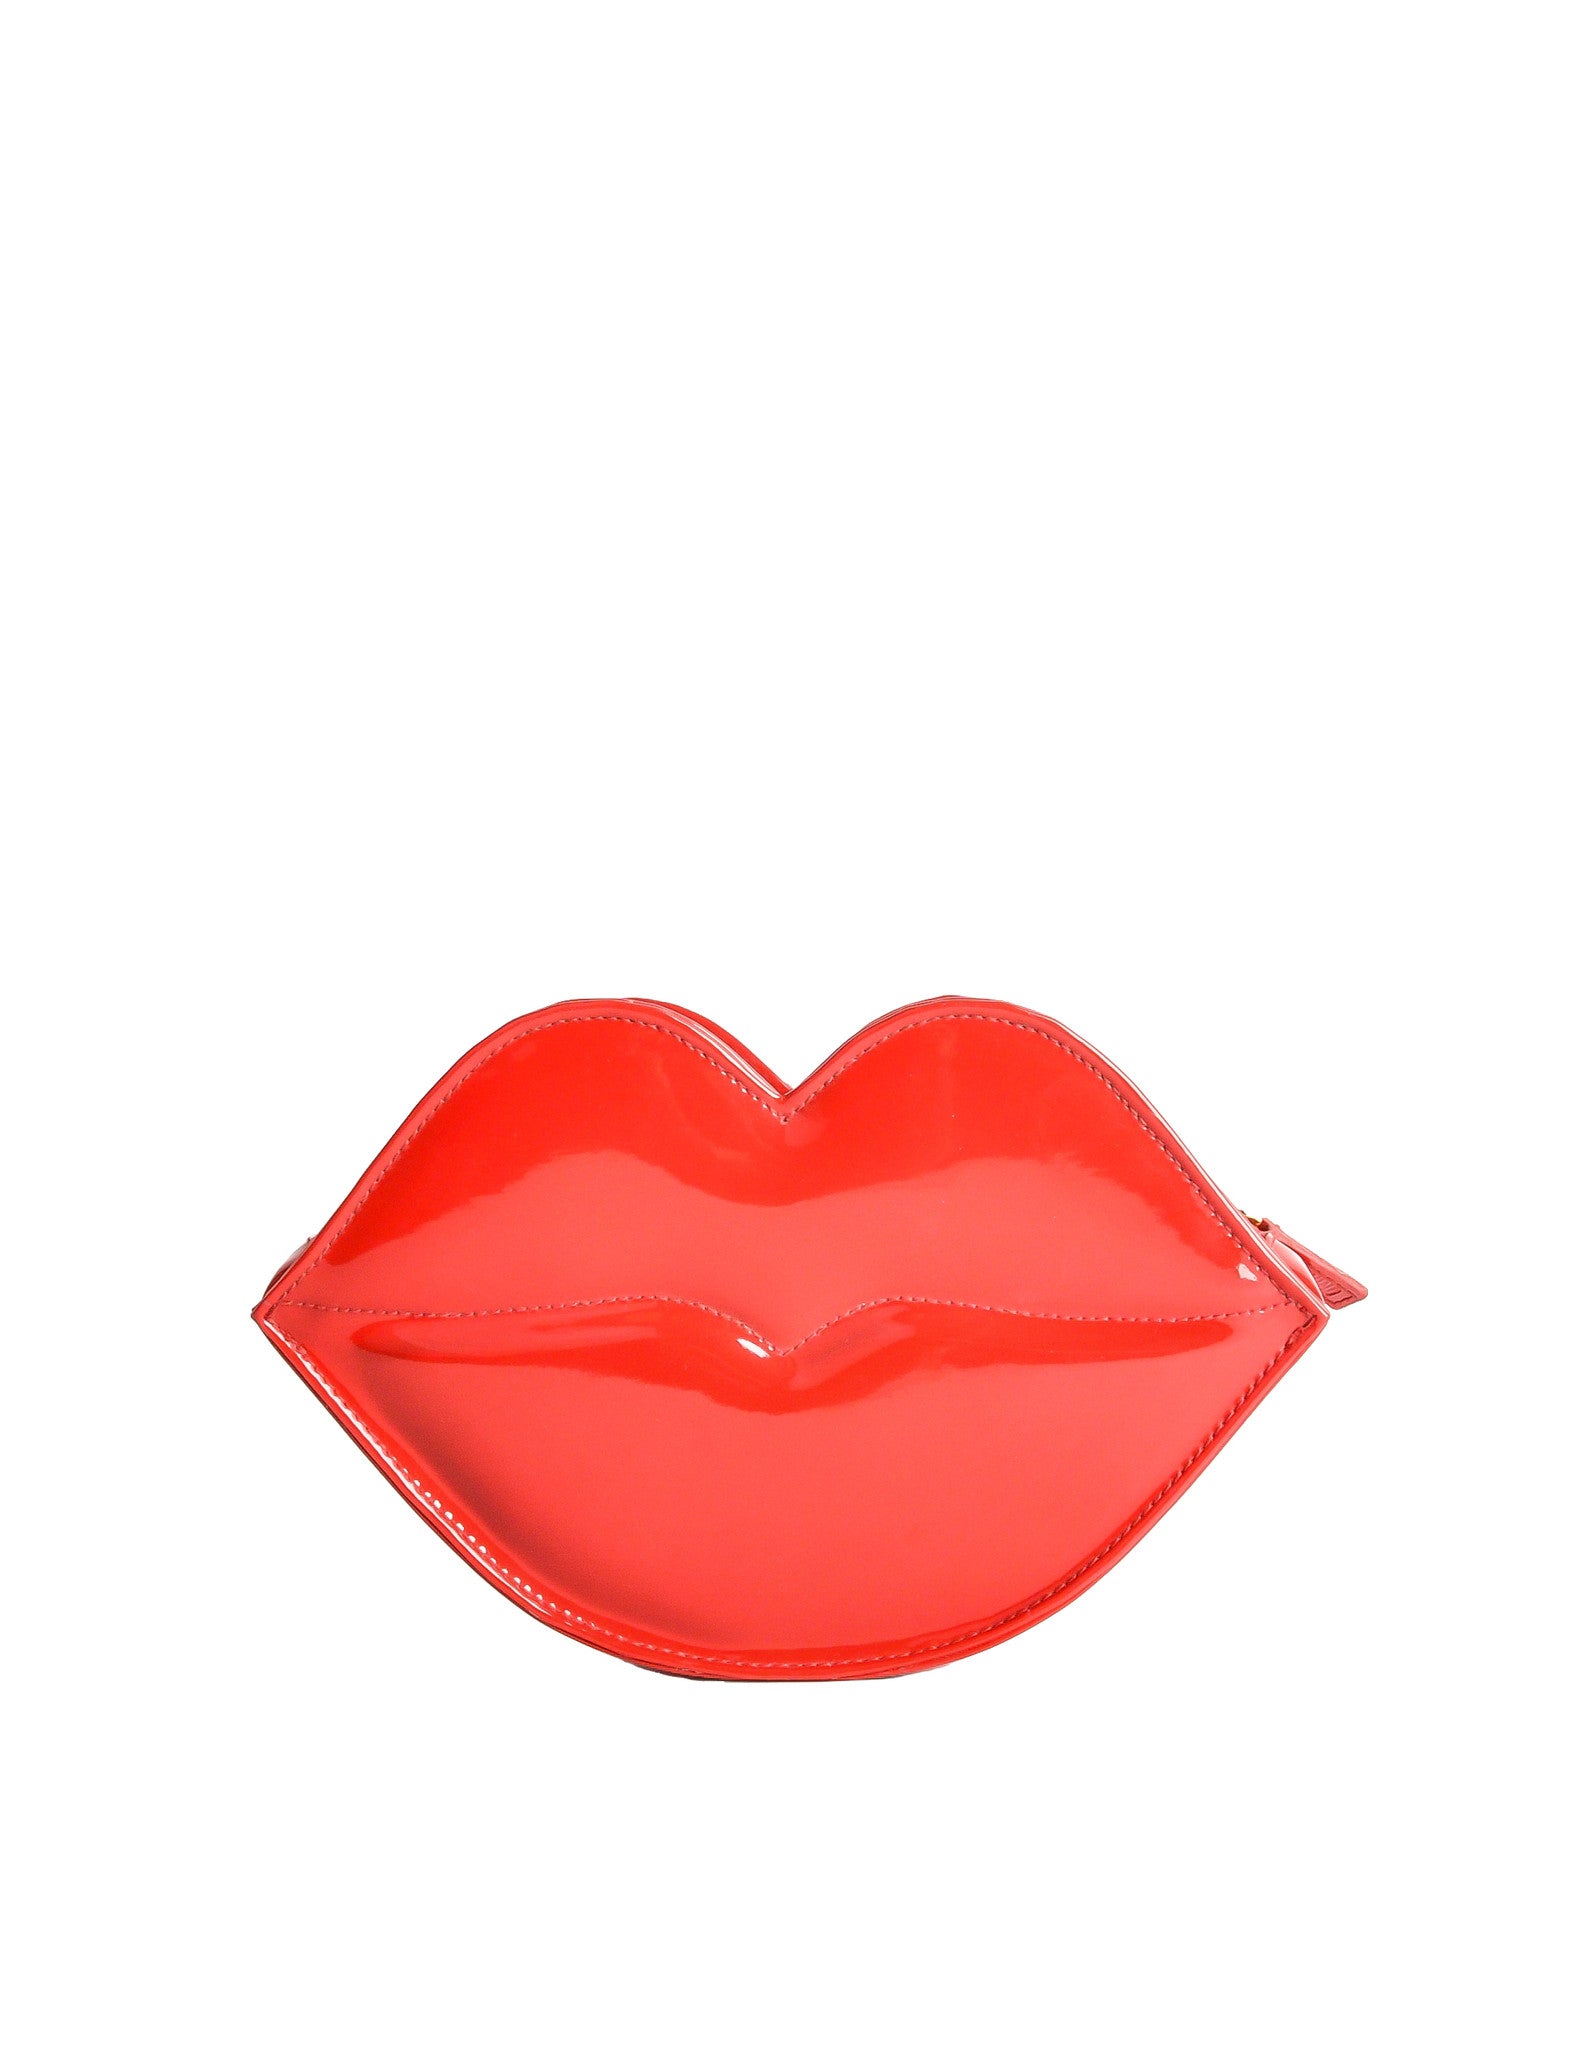 Moschino Vintage Red Patent Leather Lips Clutch Bag - Amarcord Vintage Fashion
 - 1